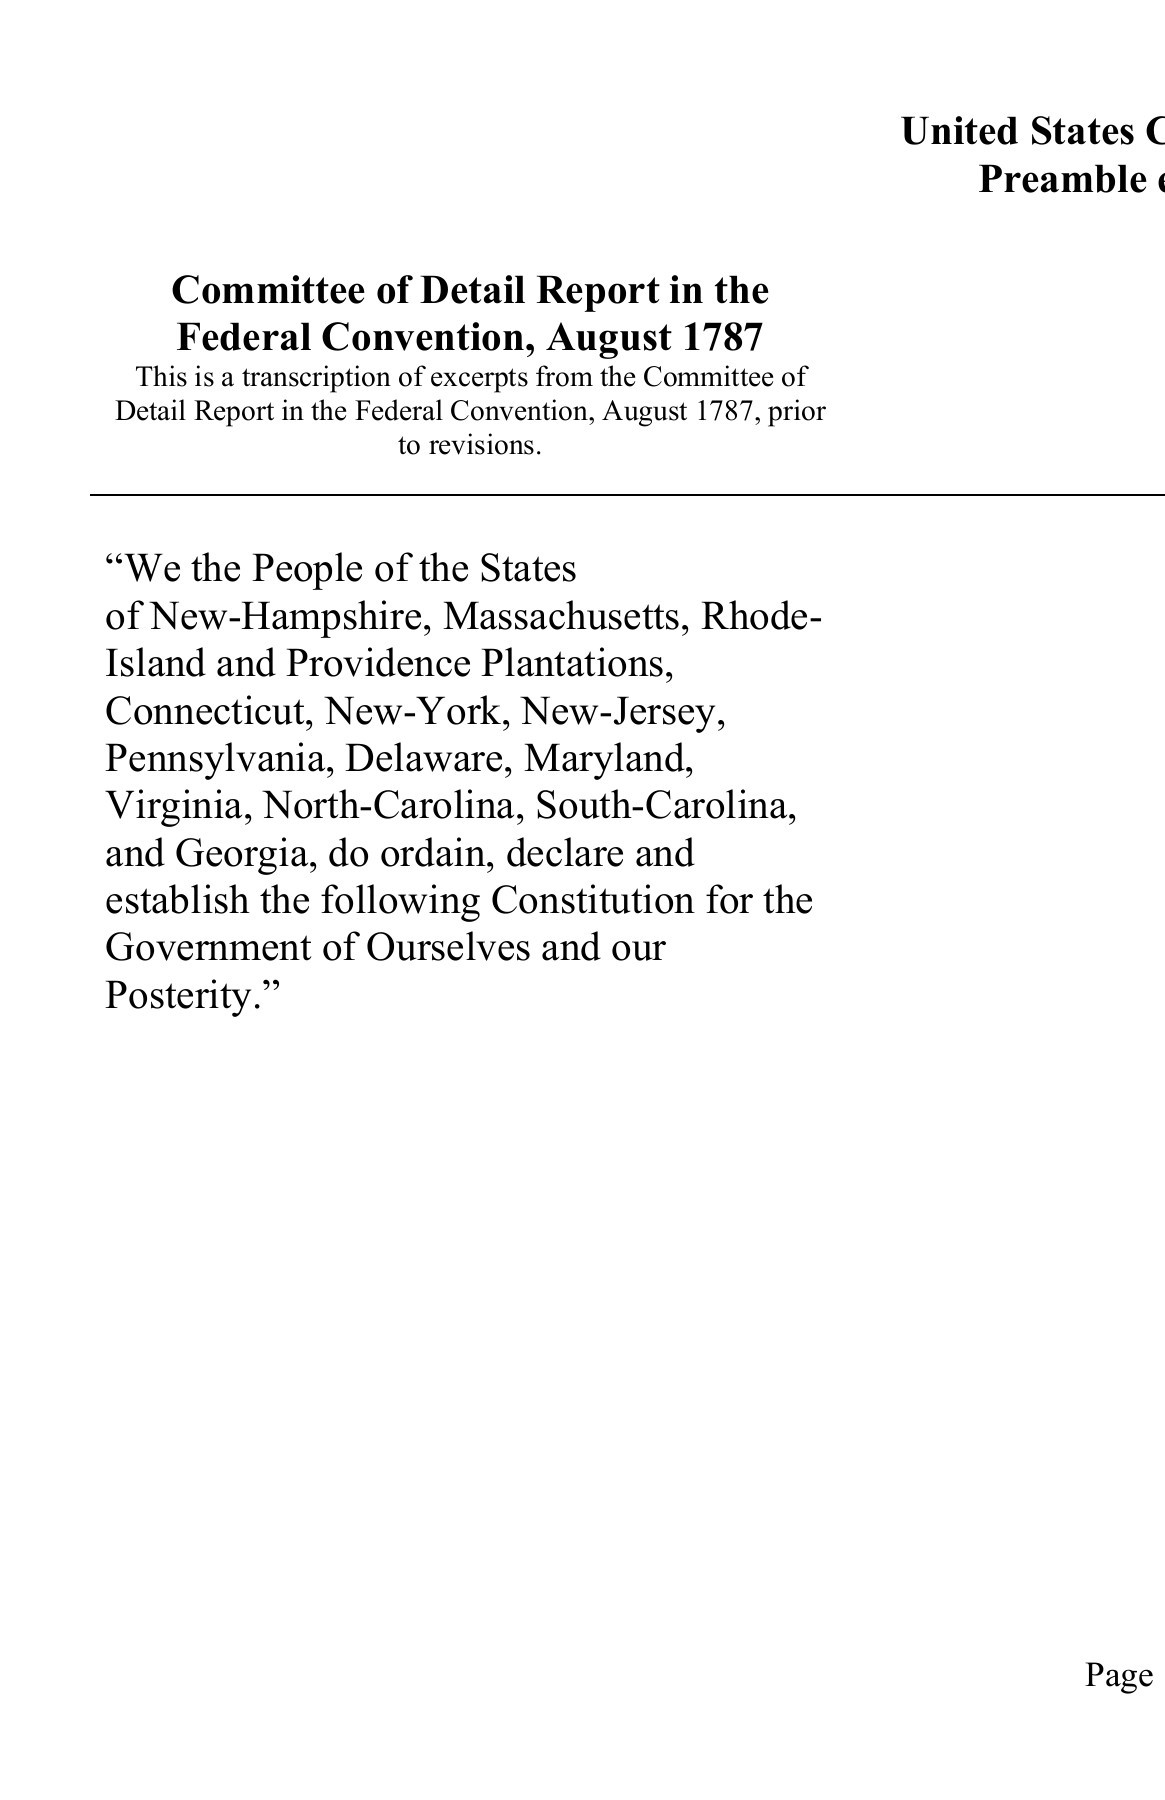 The Us Constitution Worksheet United States Constitution Worksheet Library Of Congress